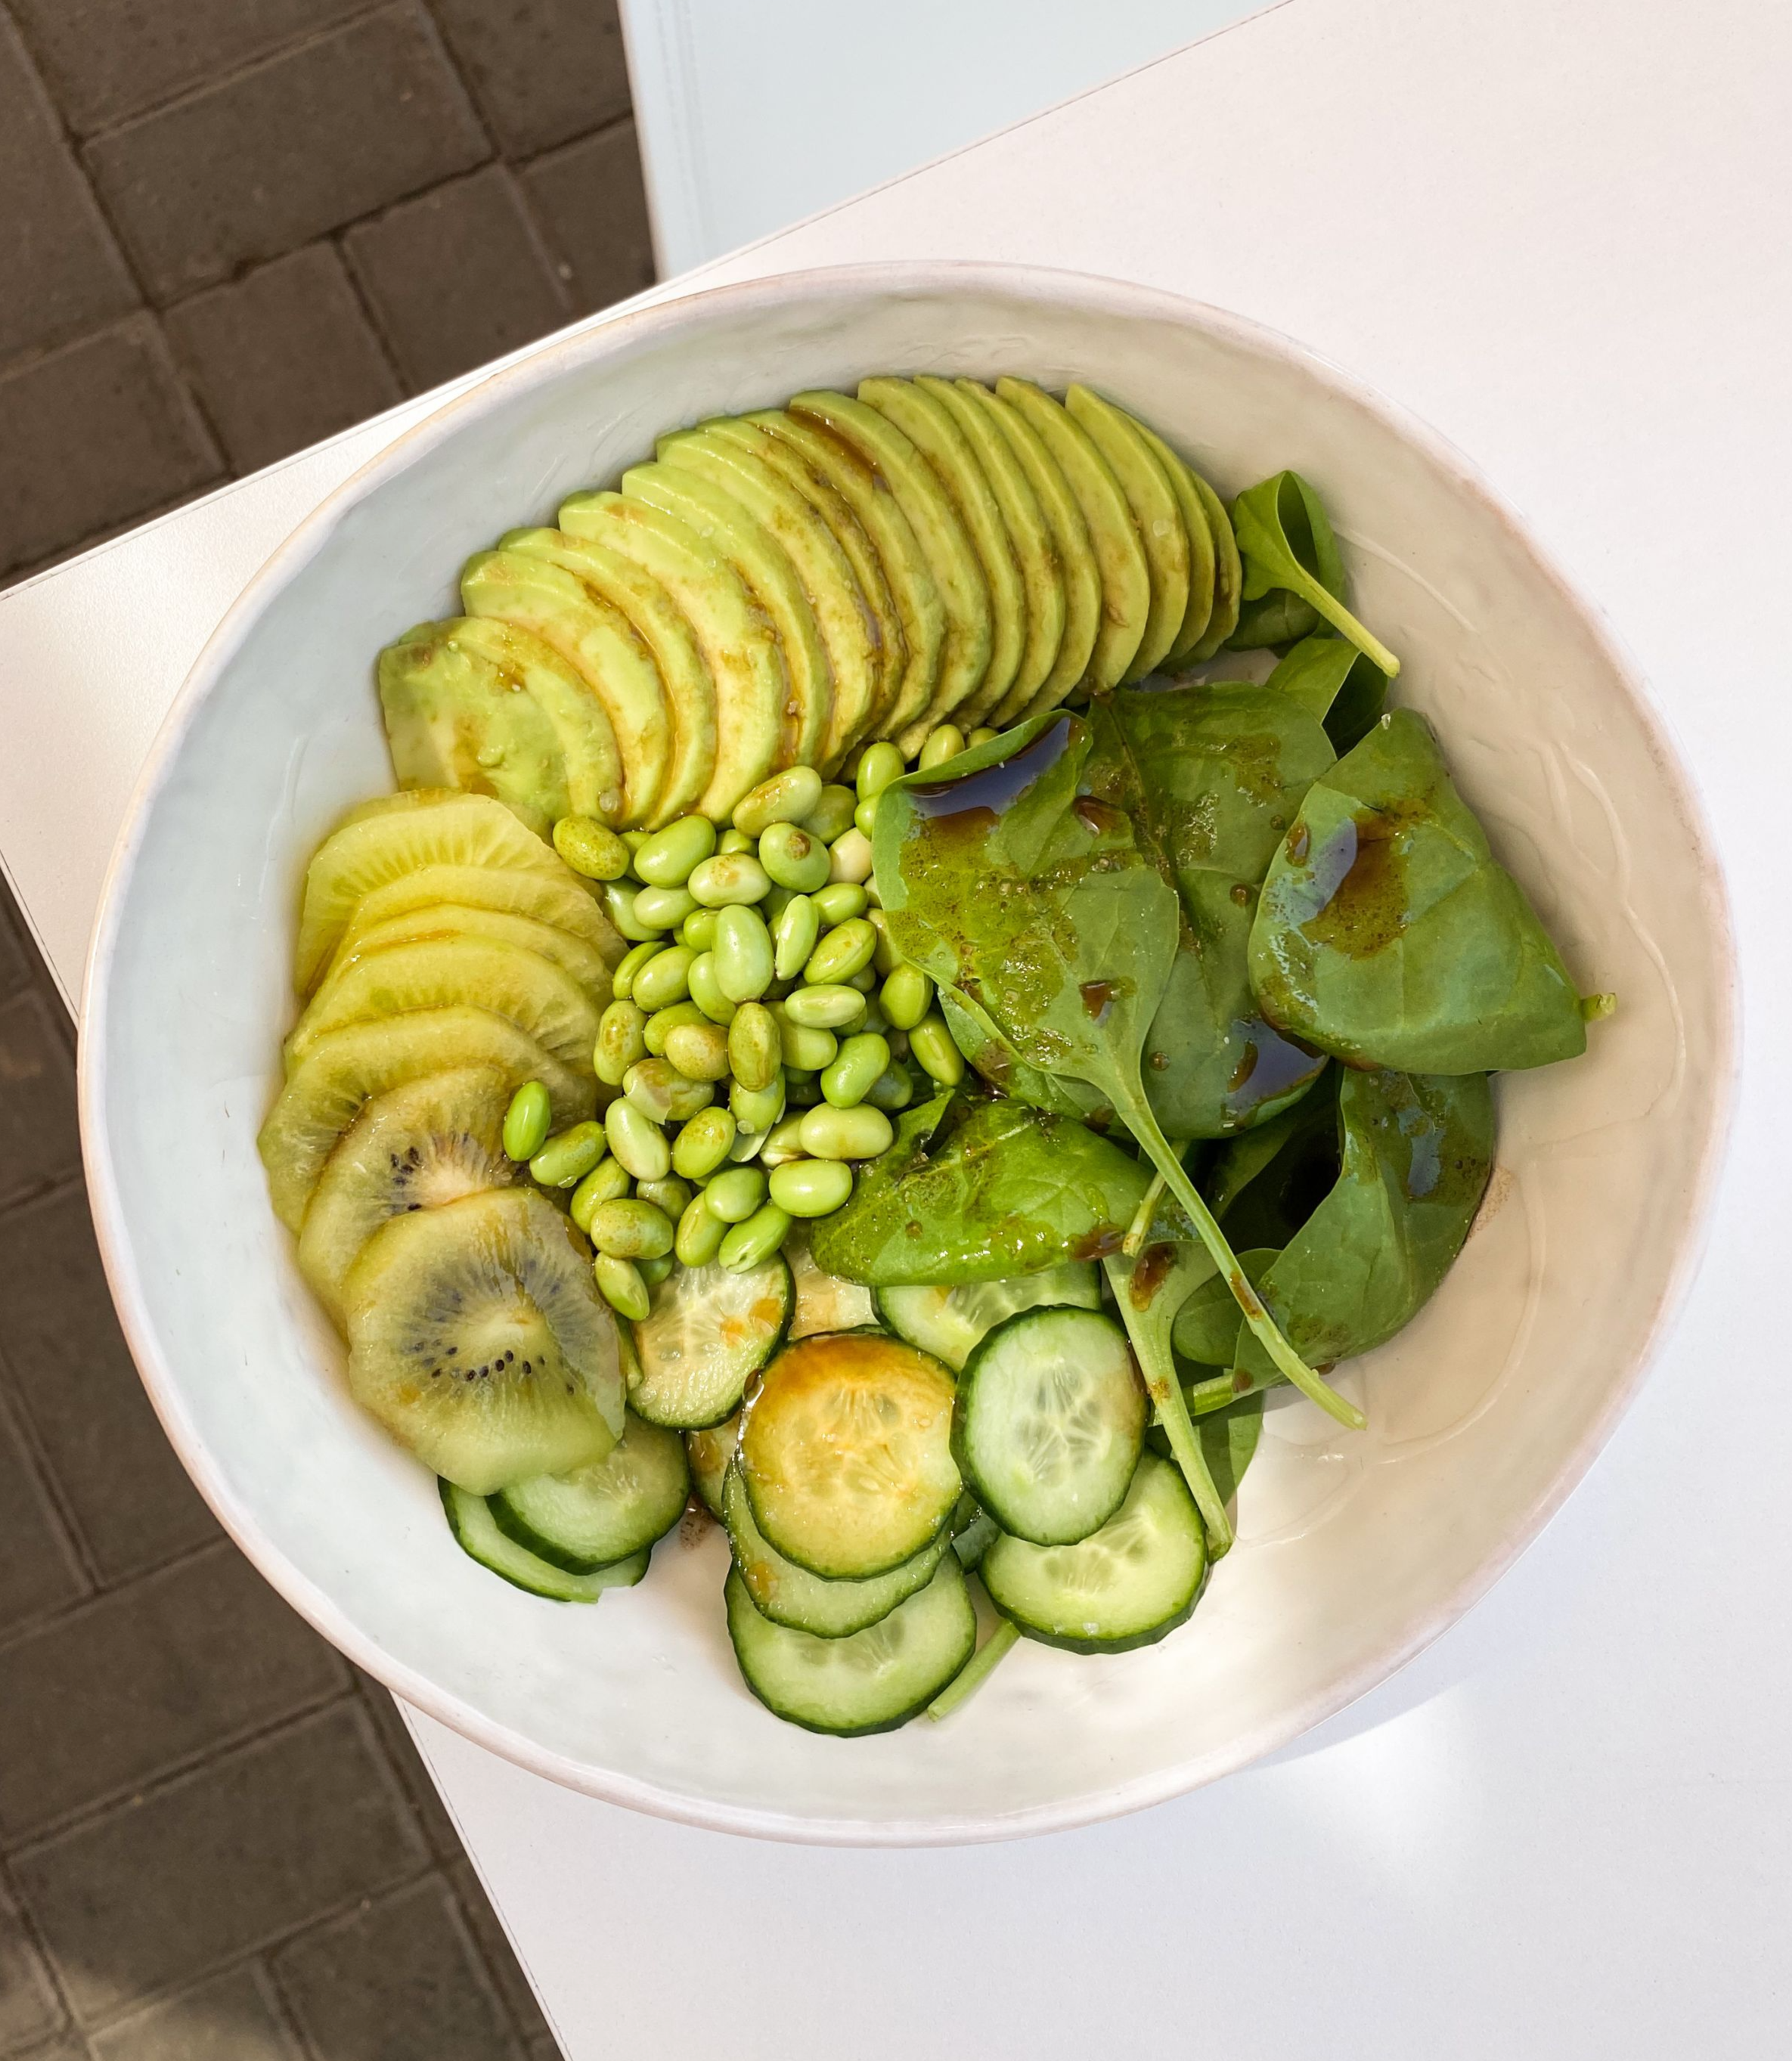 <span style="color: rgb(34, 34, 34);"><span style="color: #dd4b39;">New!&nbsp;</span>Green salad with avocado, edamame, fresh cucumbers, kiwi and salad mix</span>